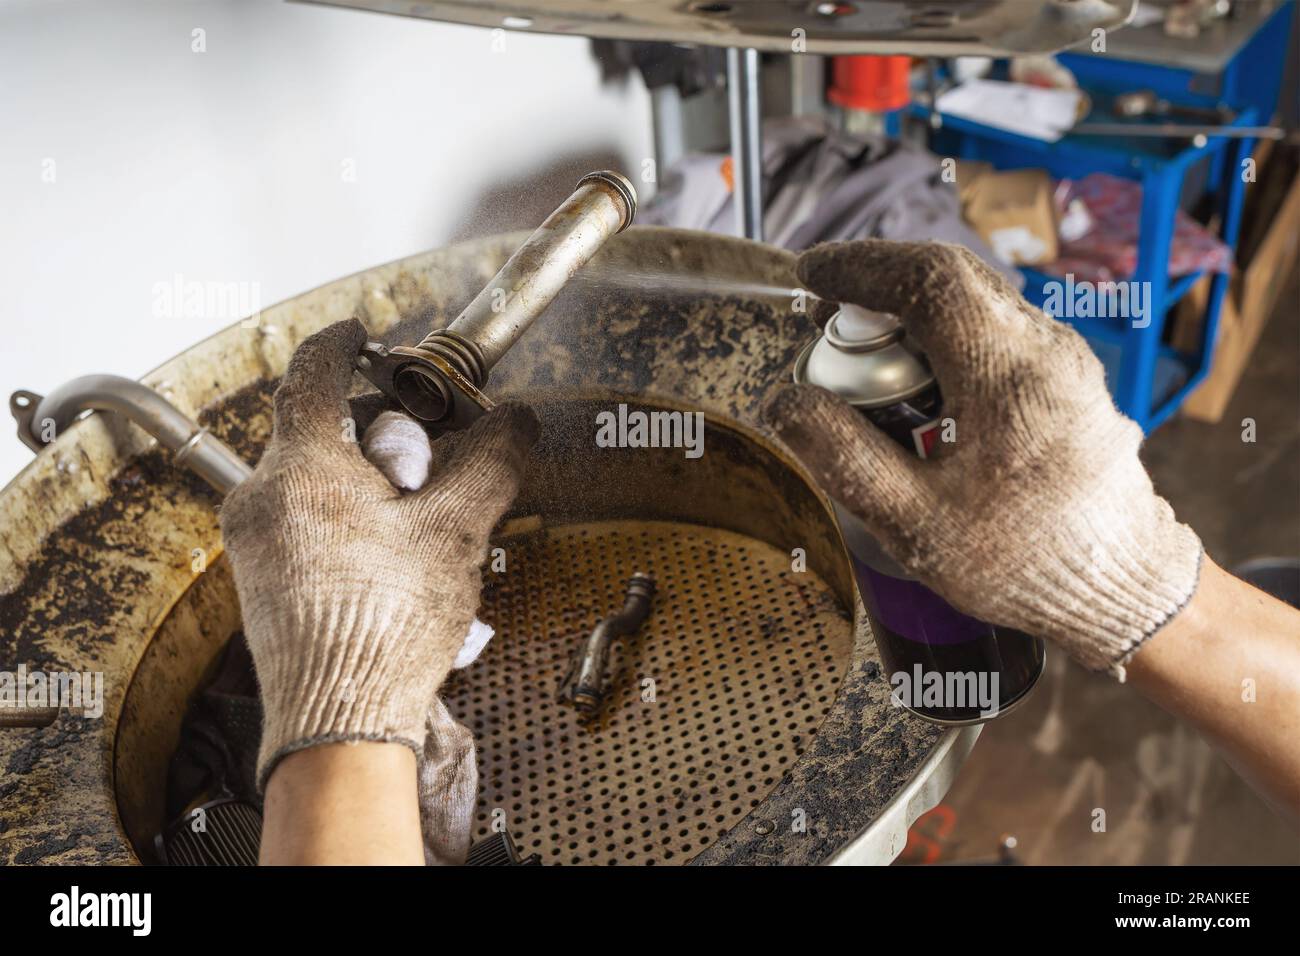 Auto mechanic using a spray to clean the parts of the heat exchanger of a car Stock Photo